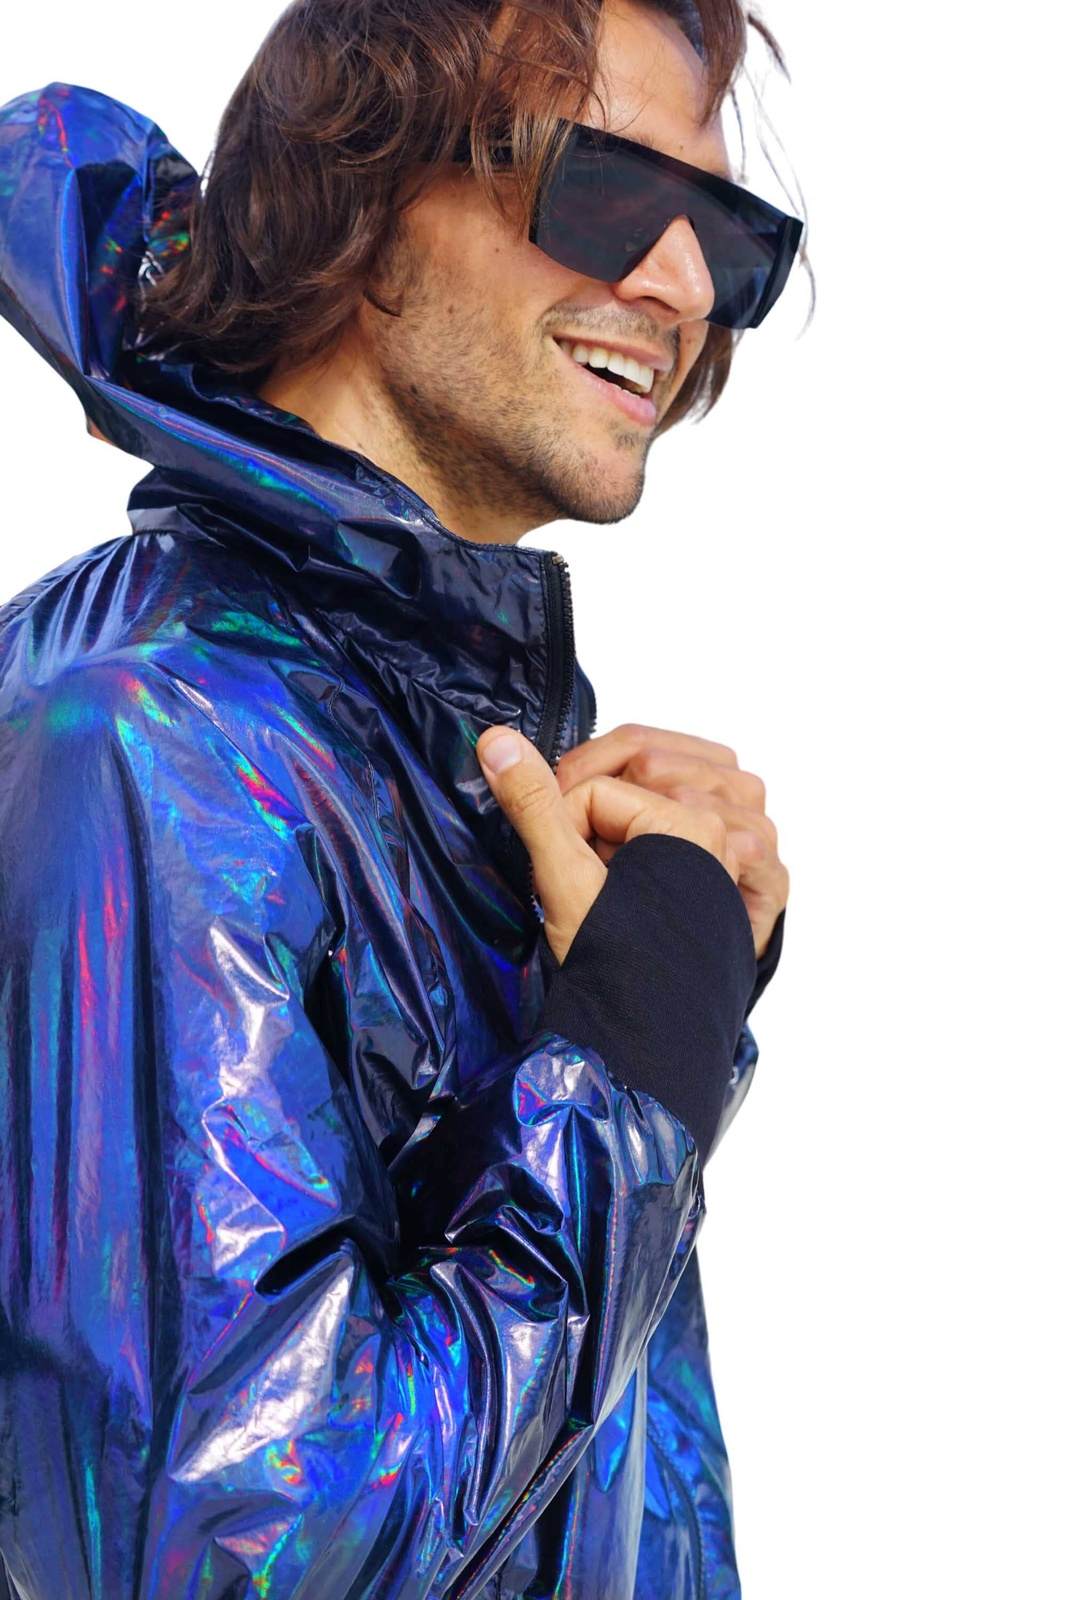 mens holographic waterproof festival jacket with thumb cuffs from Love Khaos street and rave wear brand